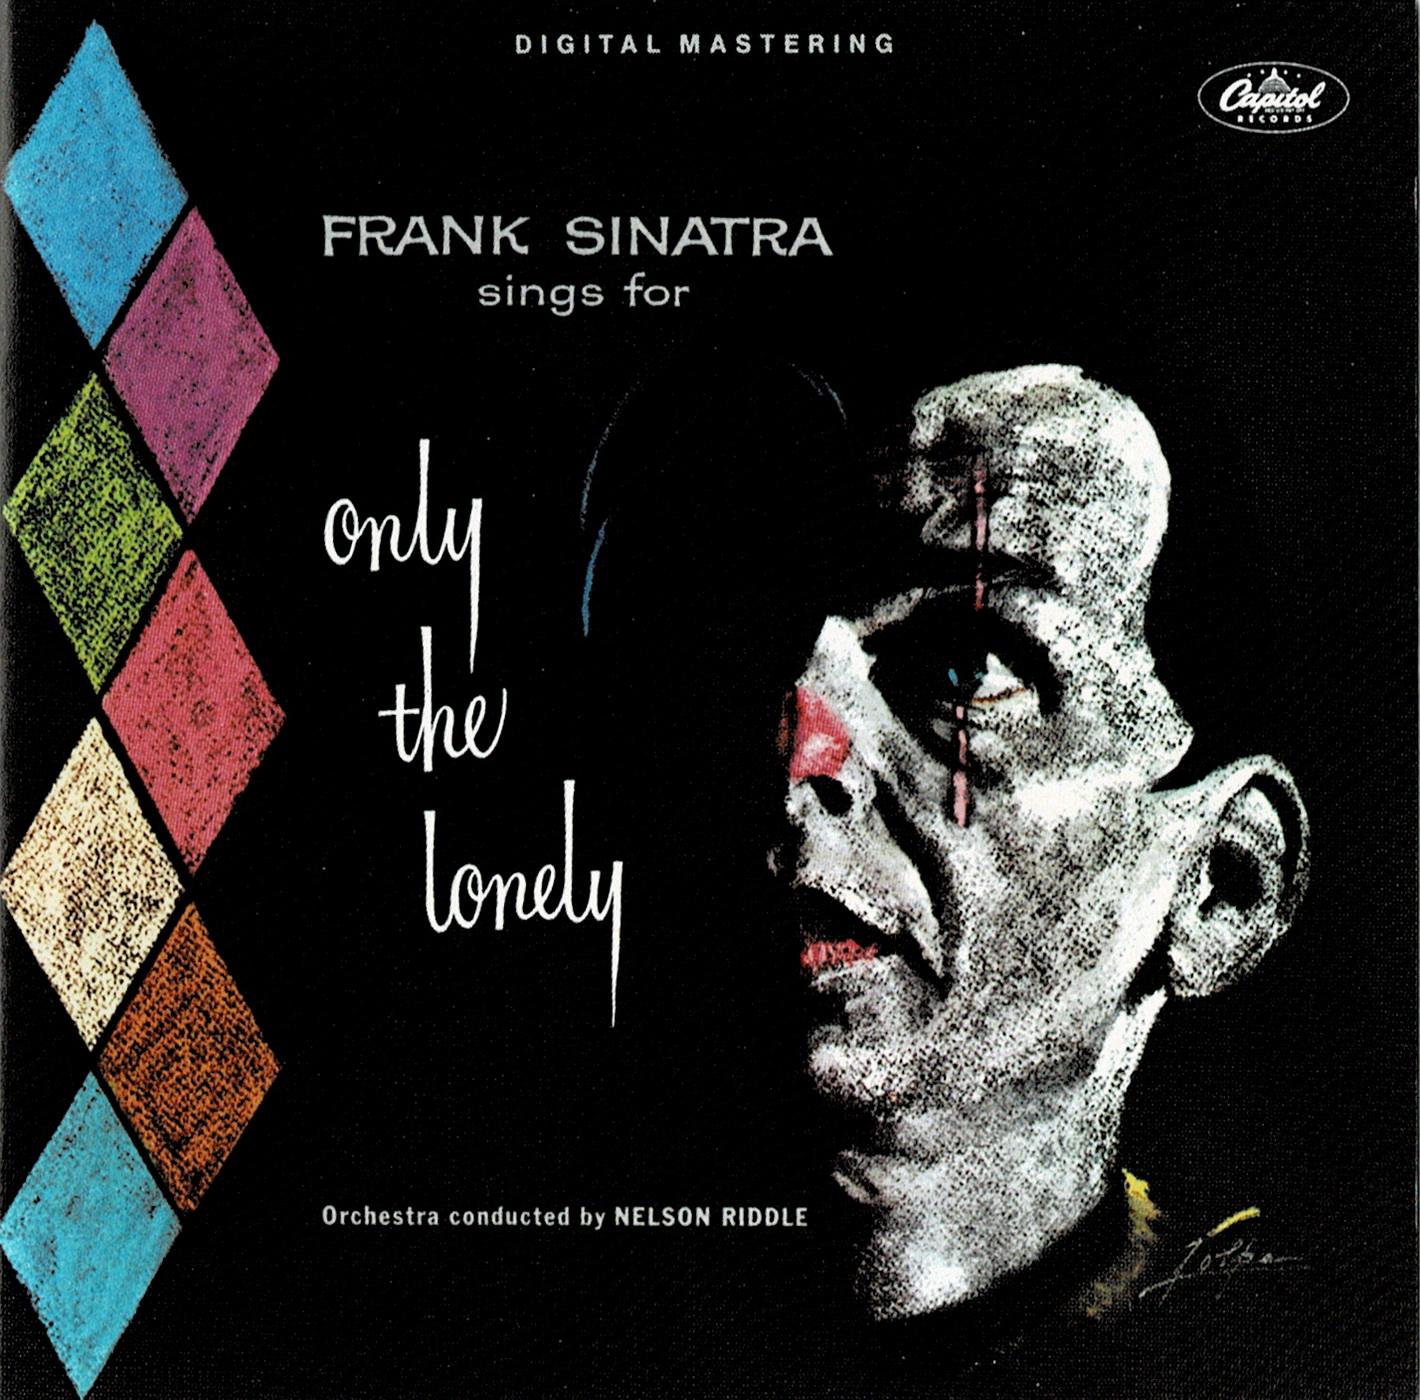 frank sinatra on the cover of his album only the lonely